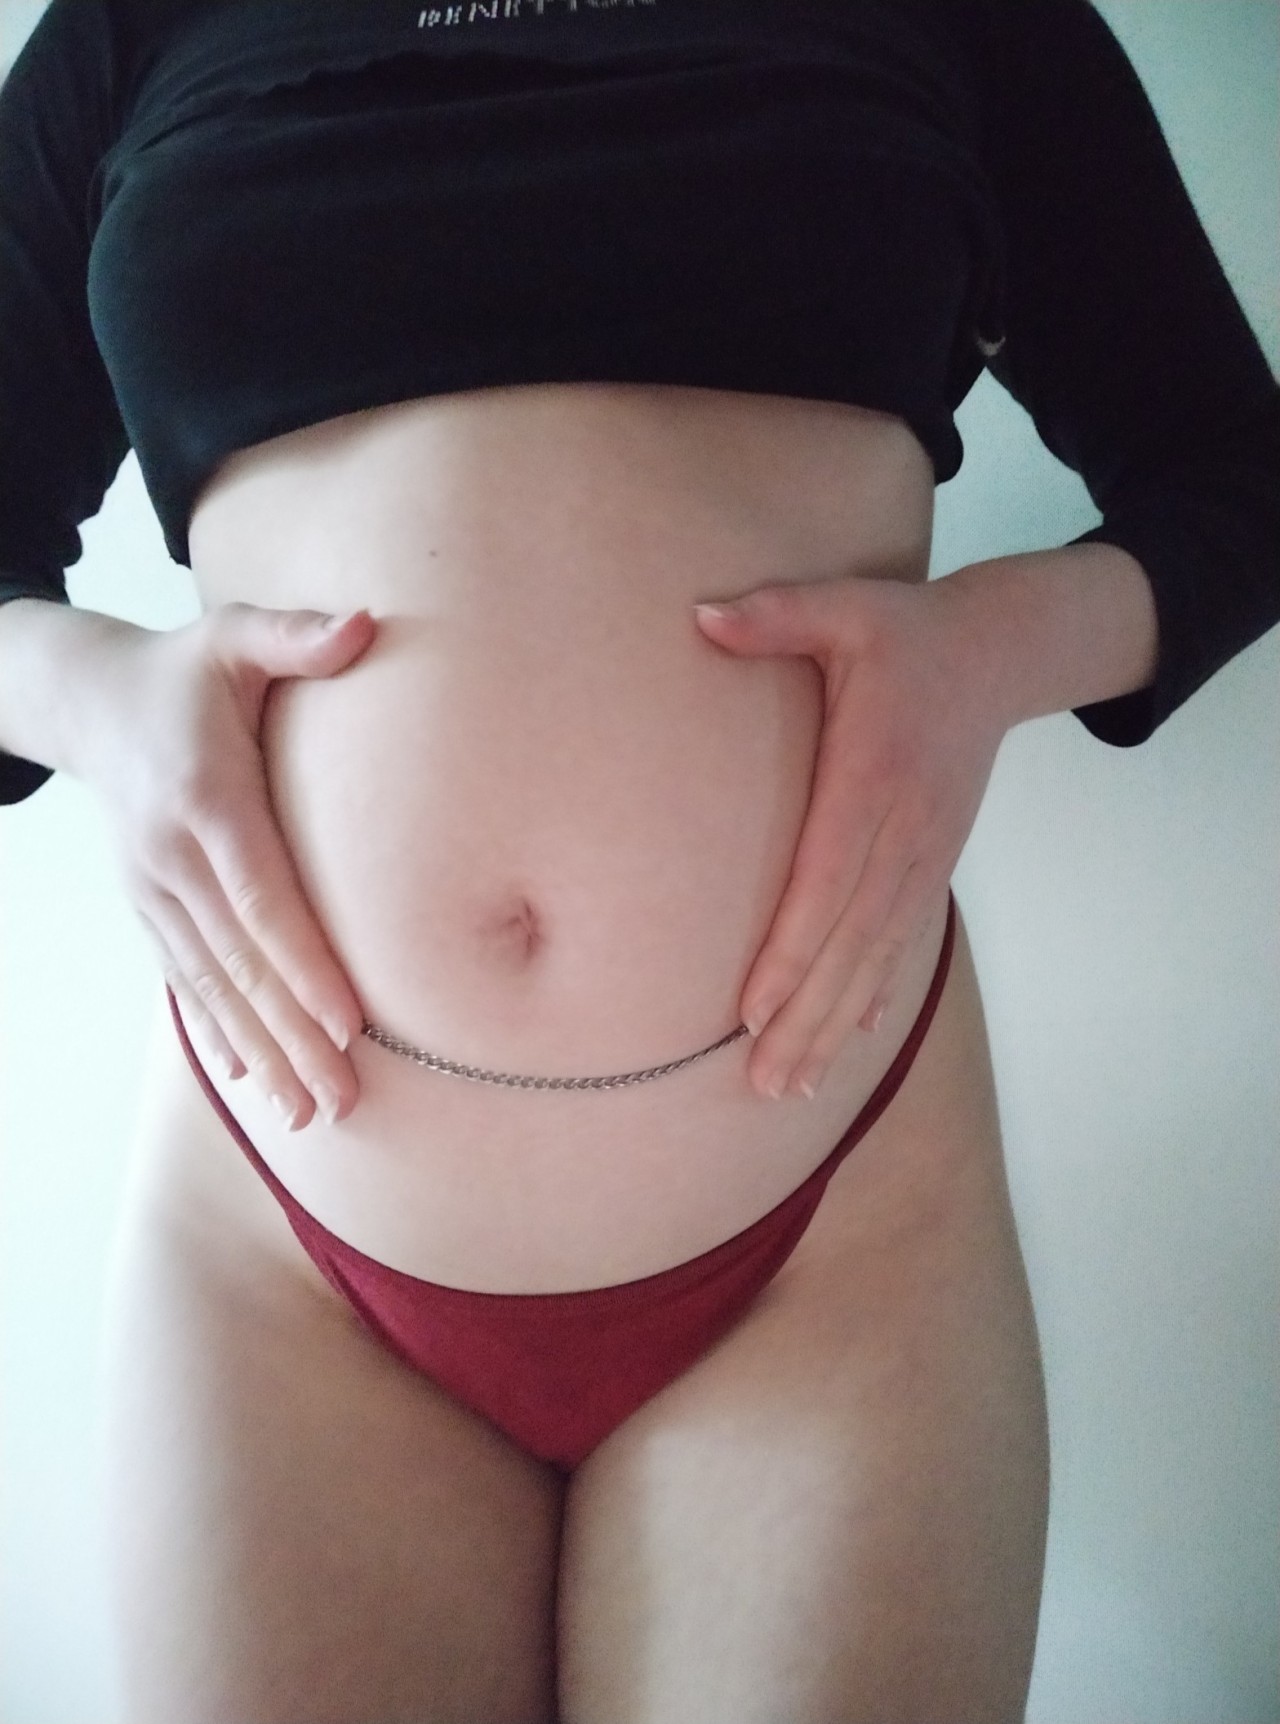 Porn bellabloatbelly:What do you think? (´∧ω∧｀*) photos